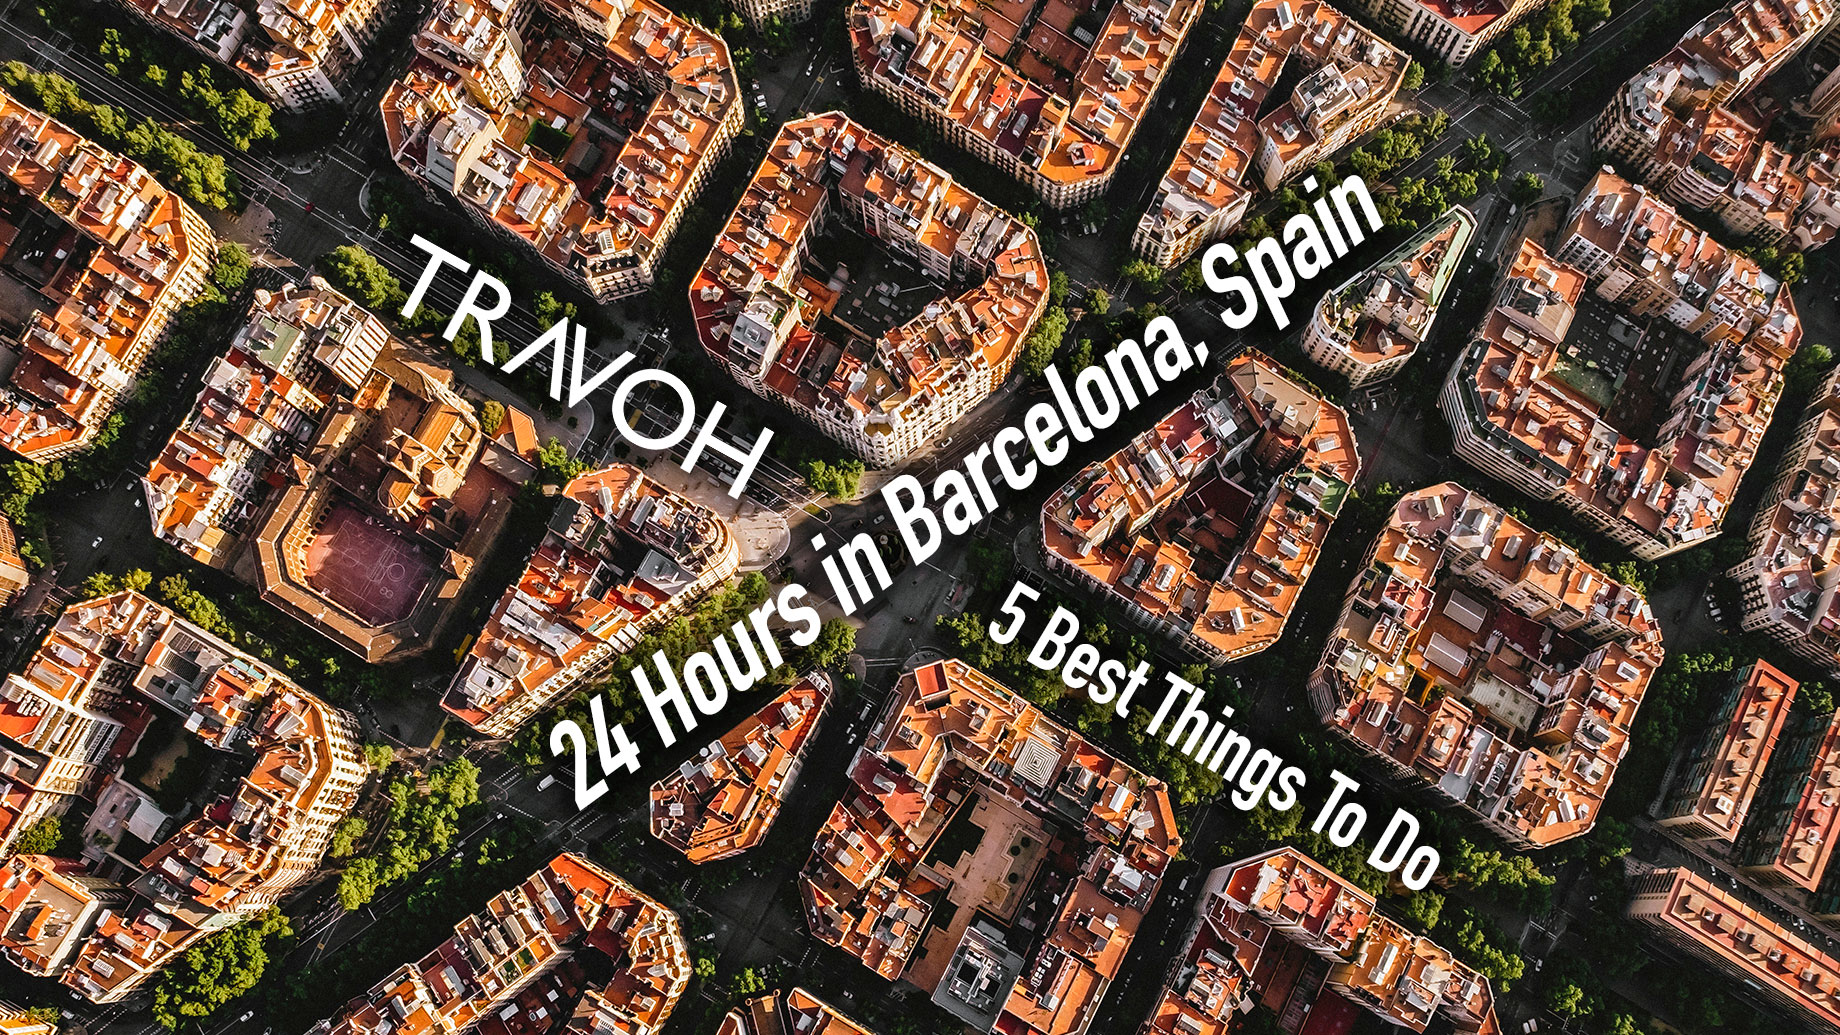 24 Hours in Barcelona, Spain: 5 Best Things To Do